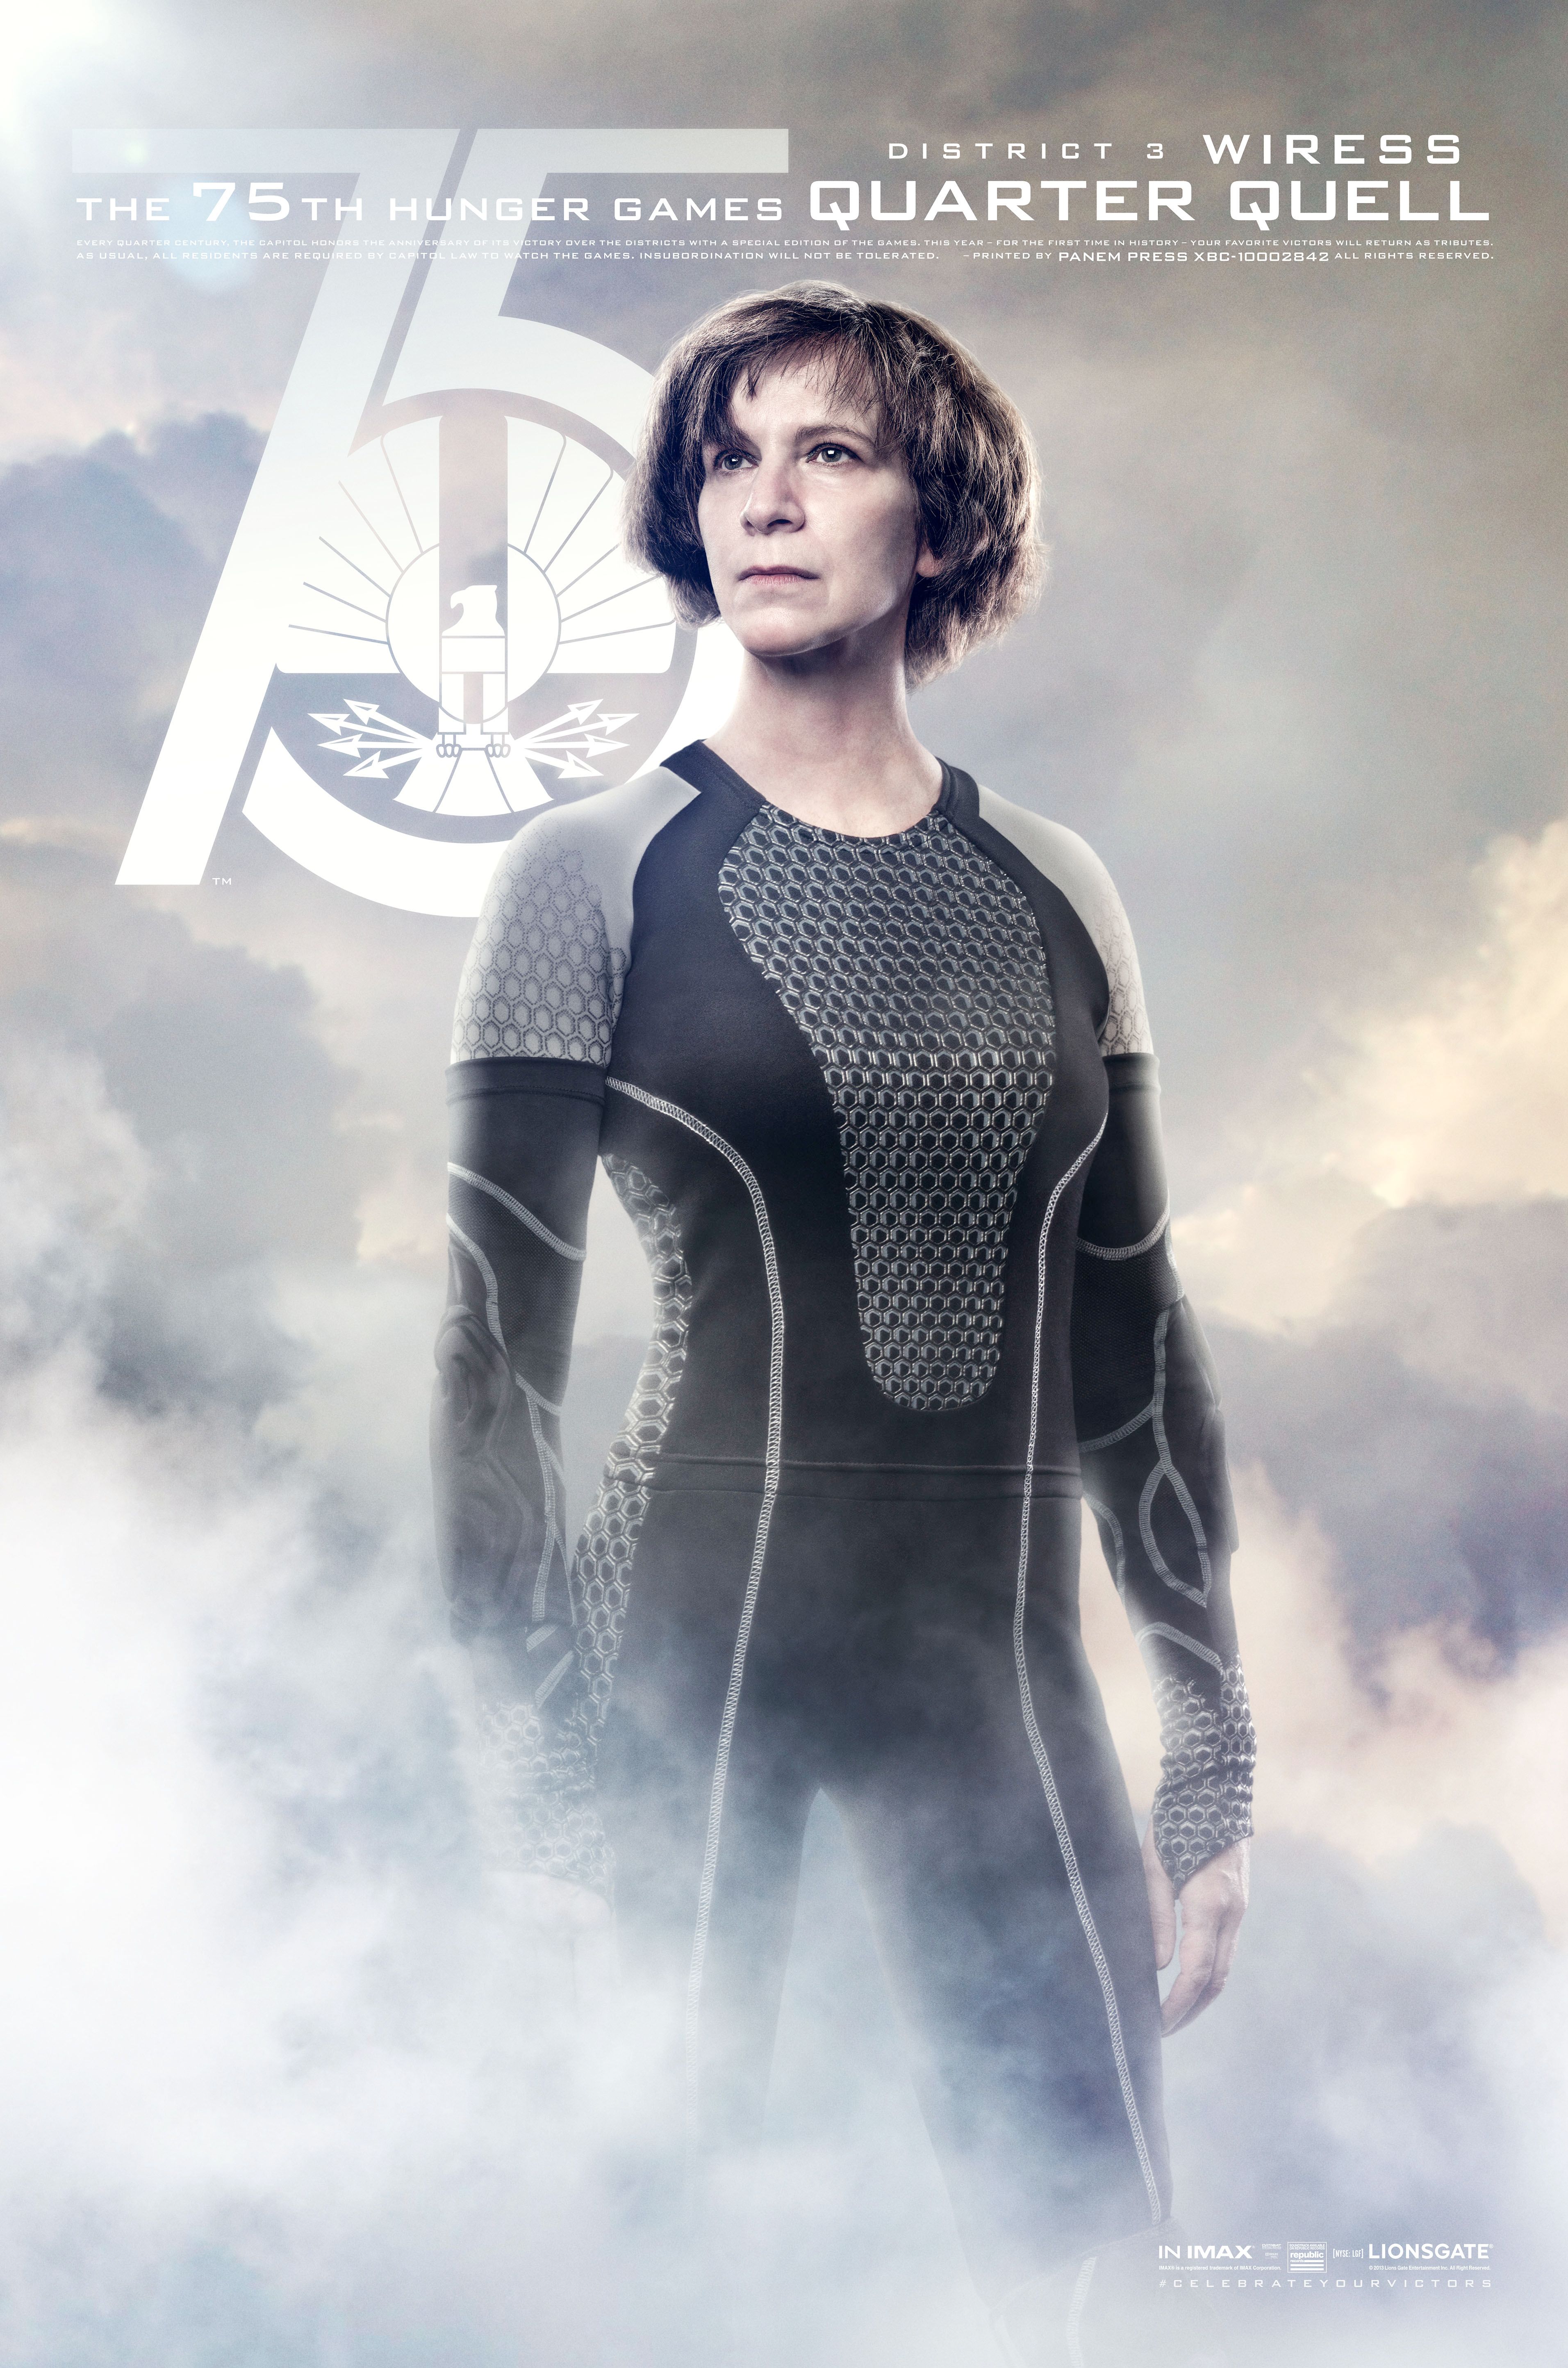 The Hunger Games Catching Fire Wiress Poster